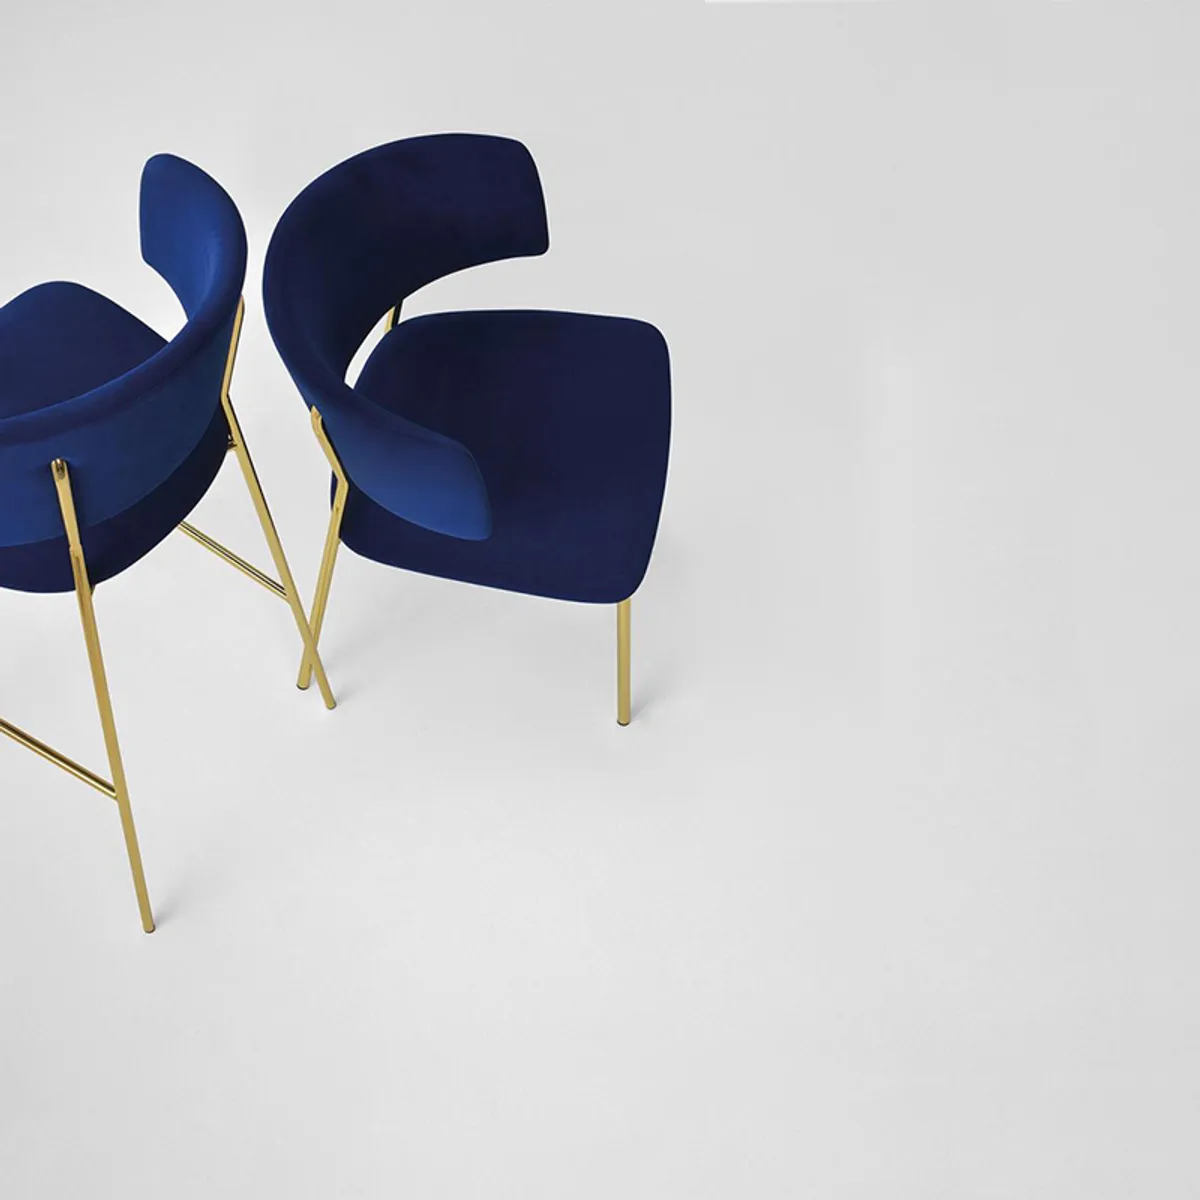 Macaron Metal Chair Collection With Steel Frames For Restaurants